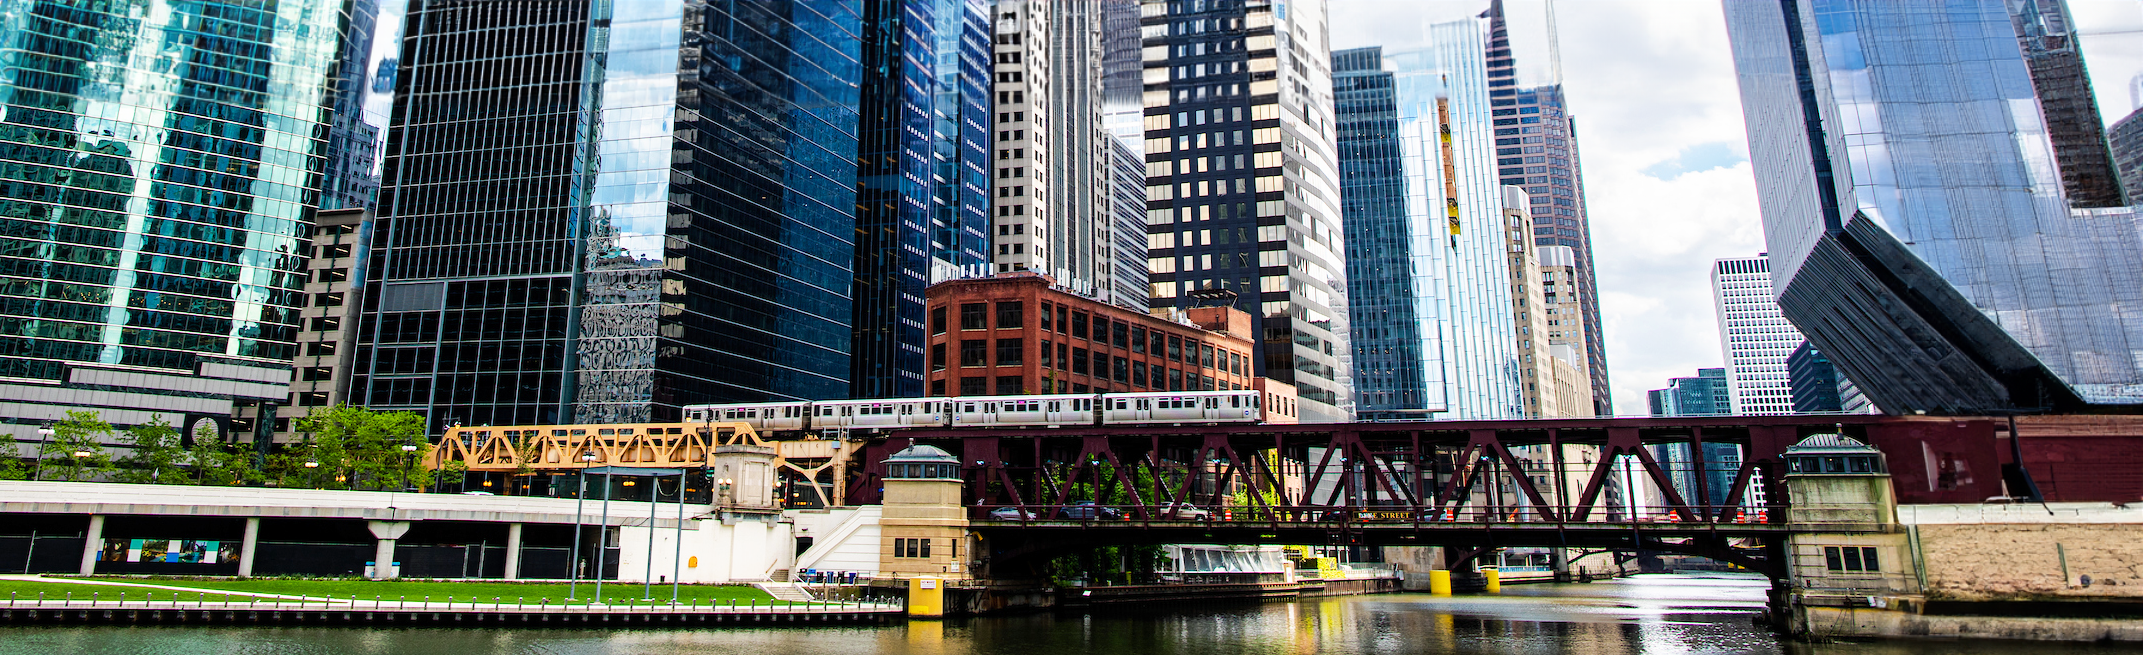 A scene of downtown Chicago, including the Chicago River, the Riverwalk, the elevated CTA train on a bridge over the river, and skyscrapers.